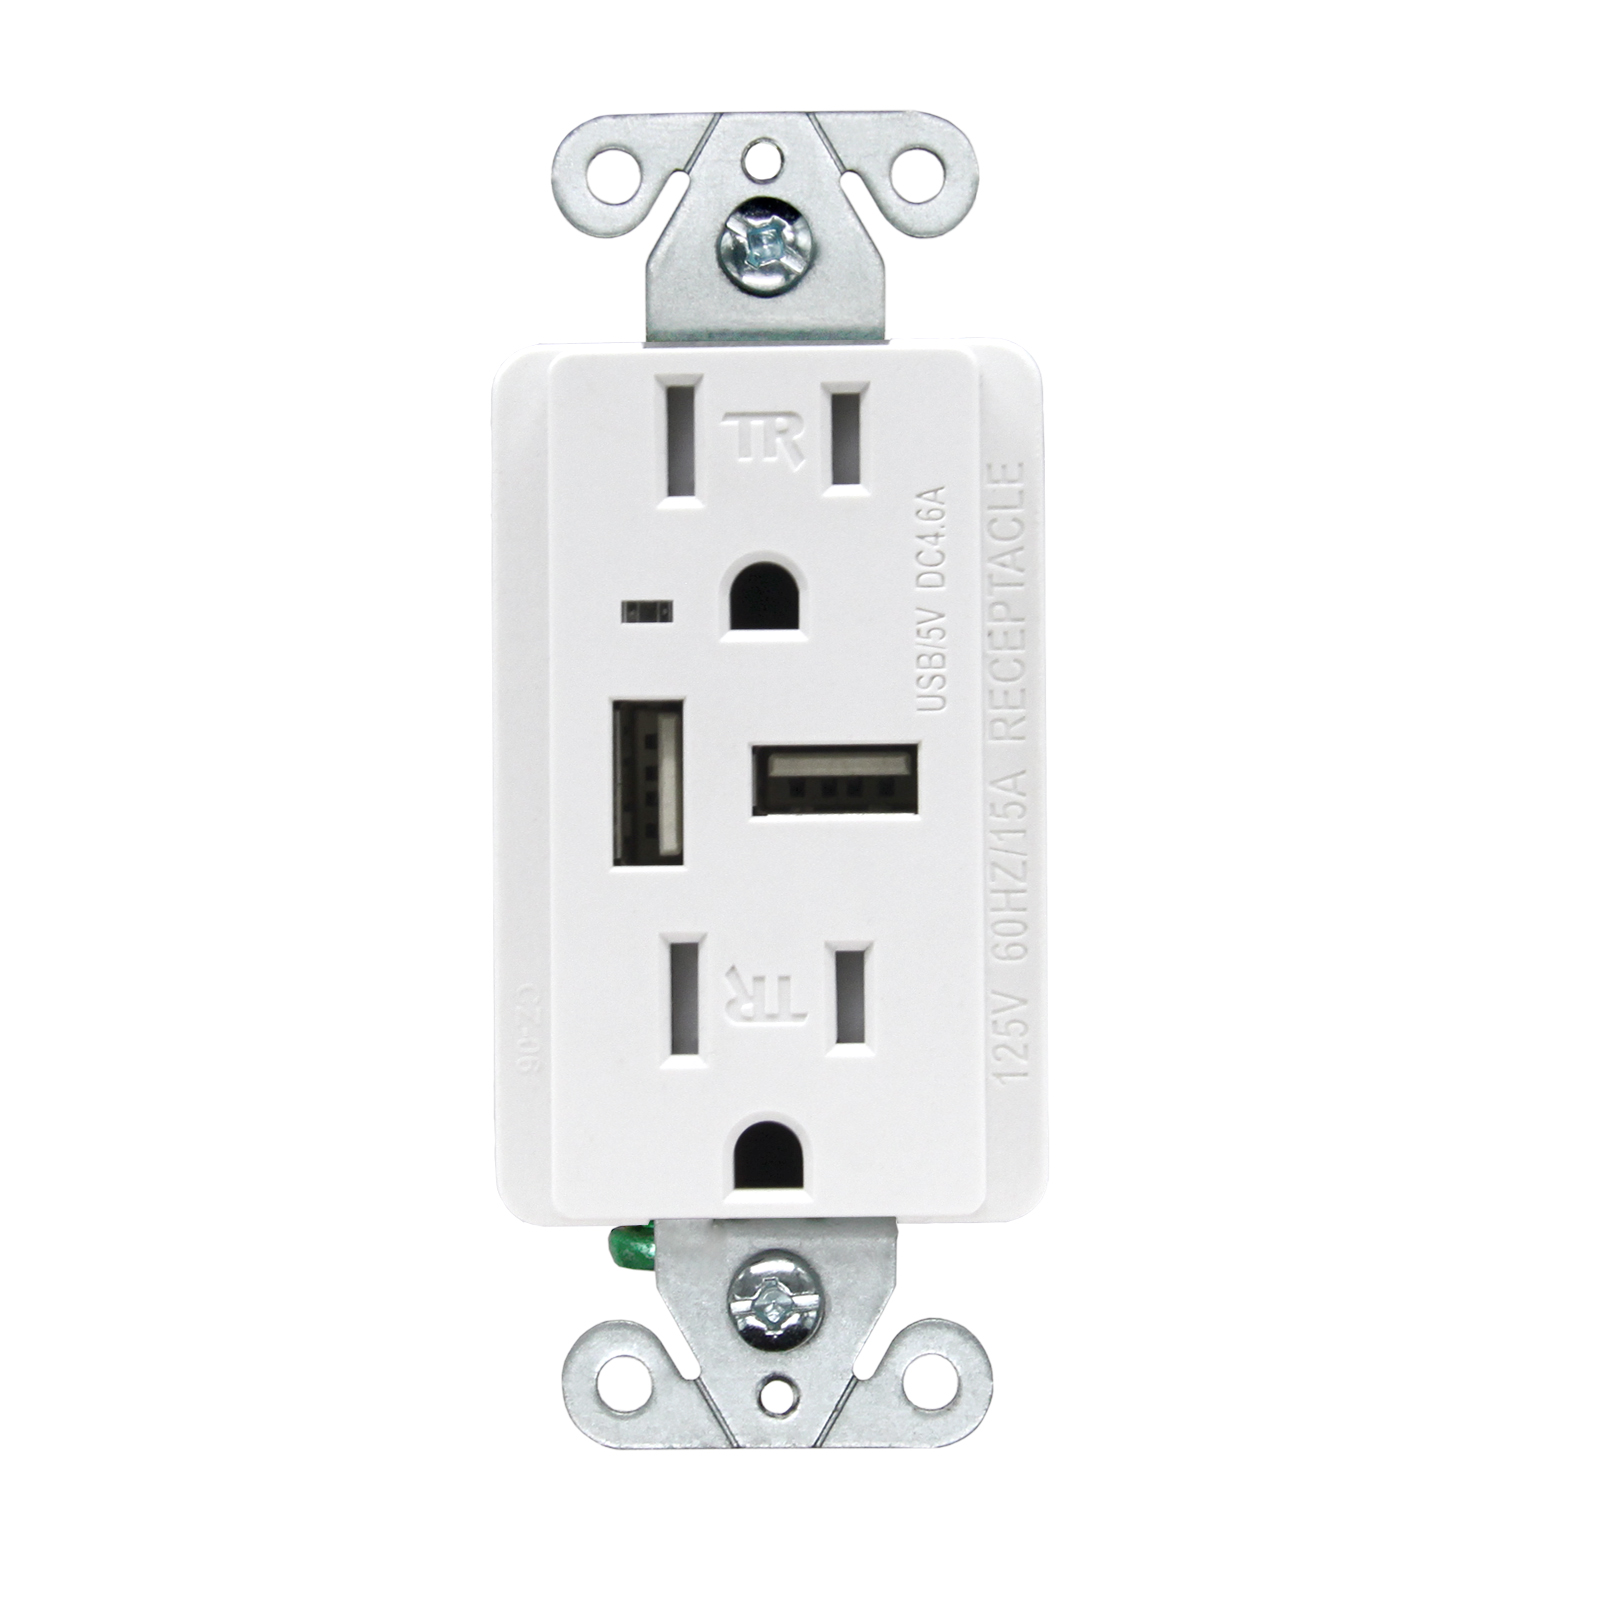 USB wall outlet